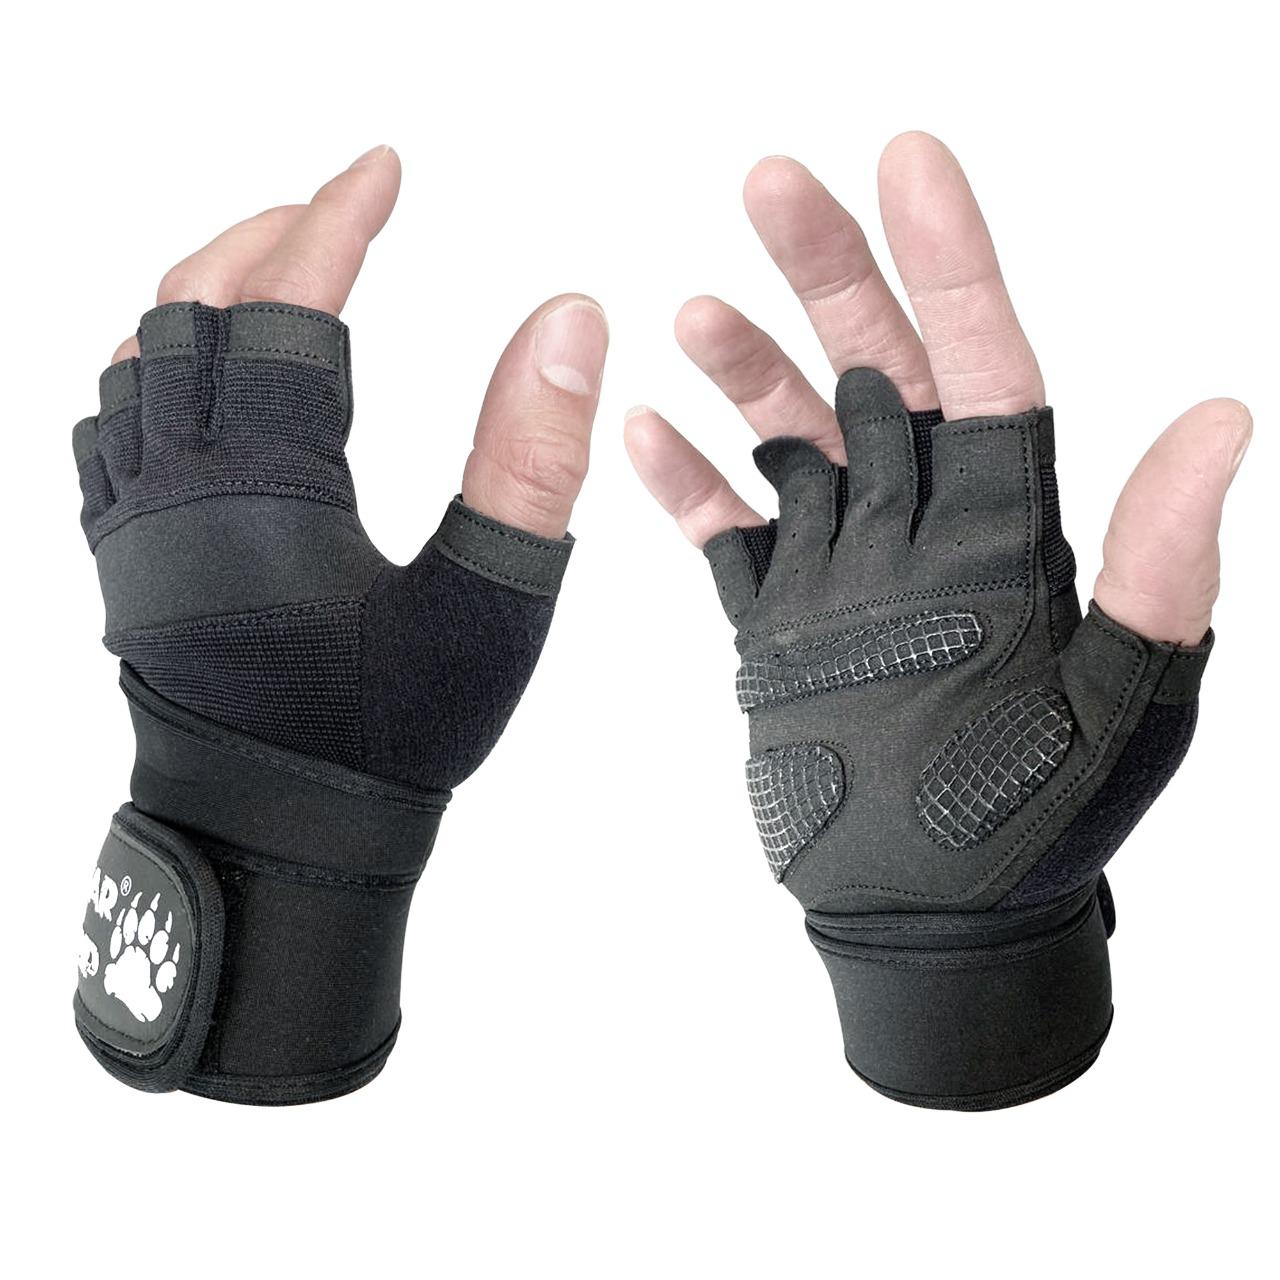 BEAR GRIP - weight lifting gloves with wrist support wraps